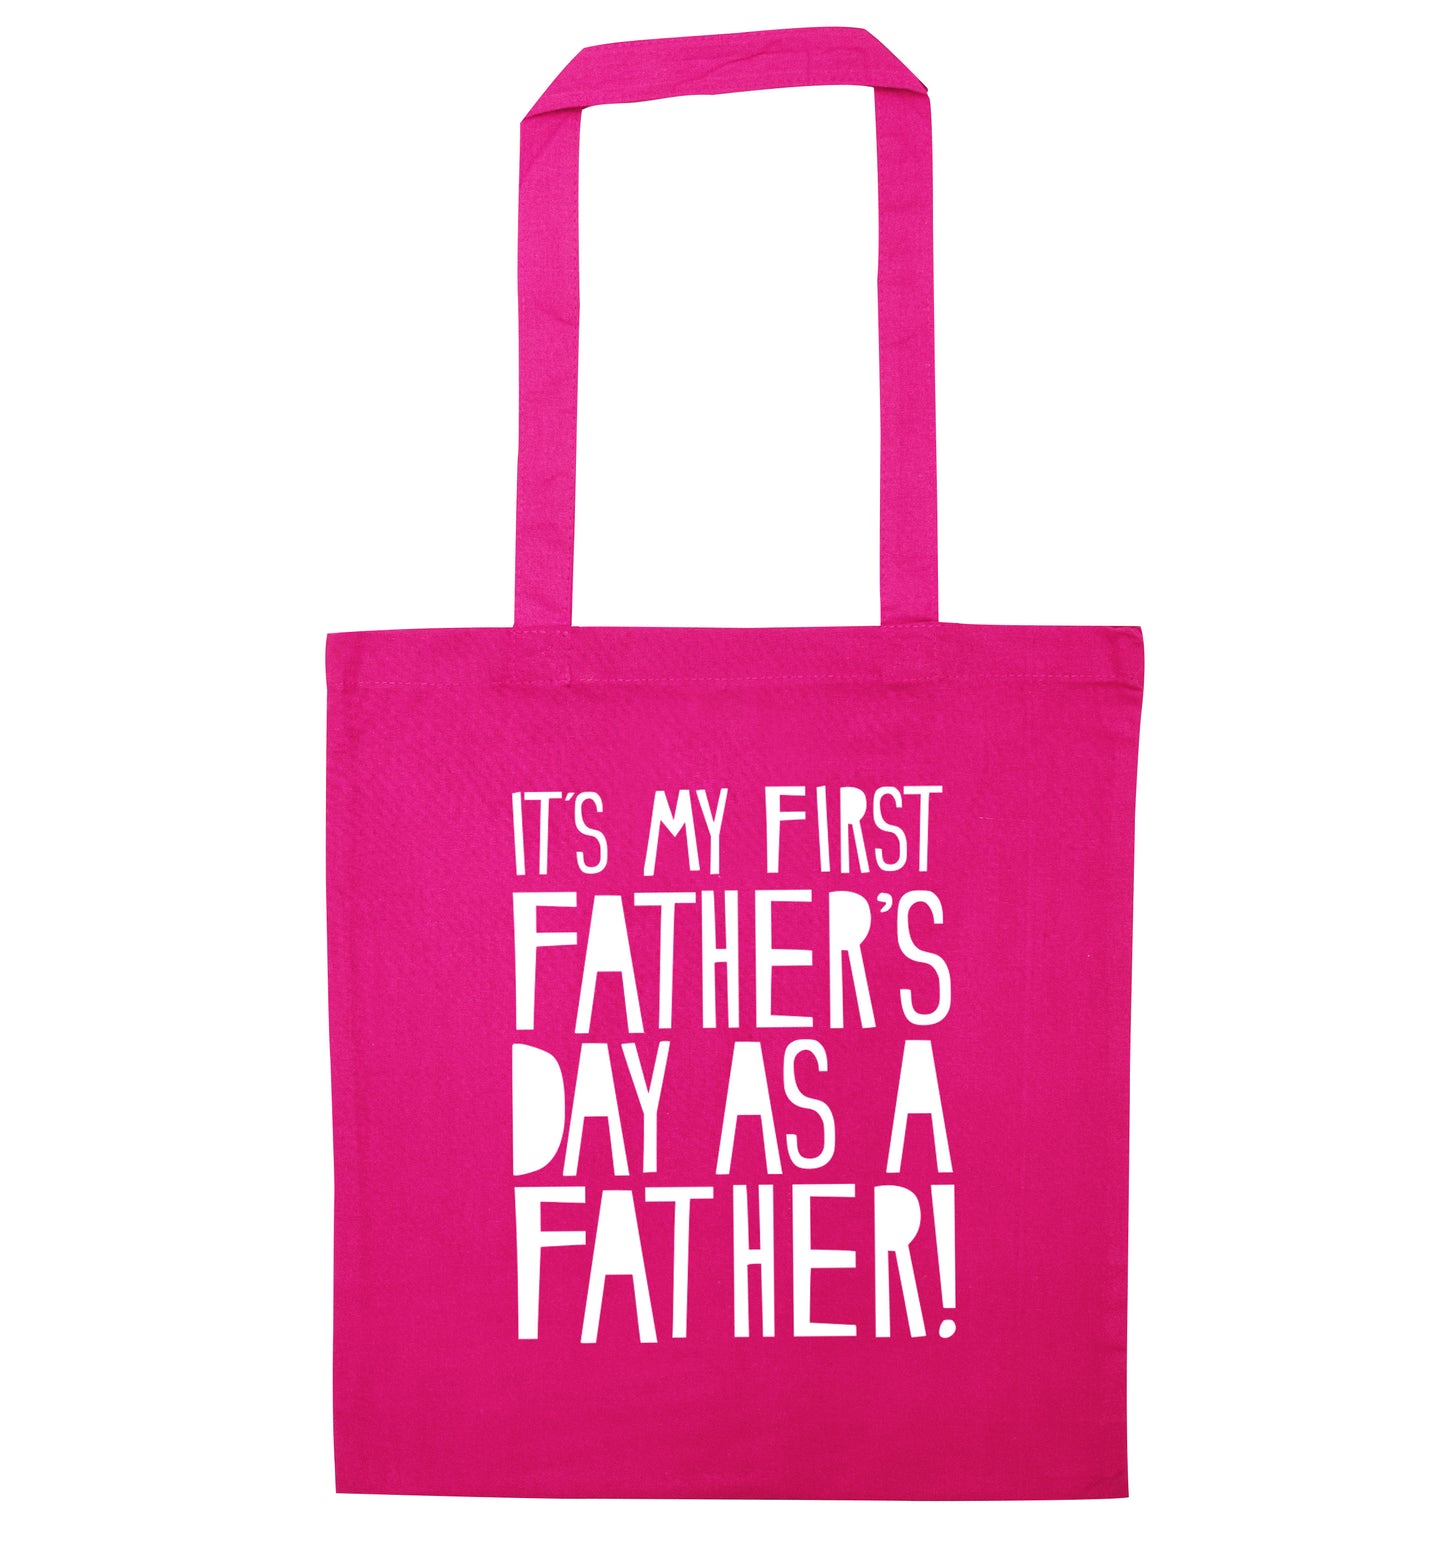 It's my first Father's Day as a father! pink tote bag